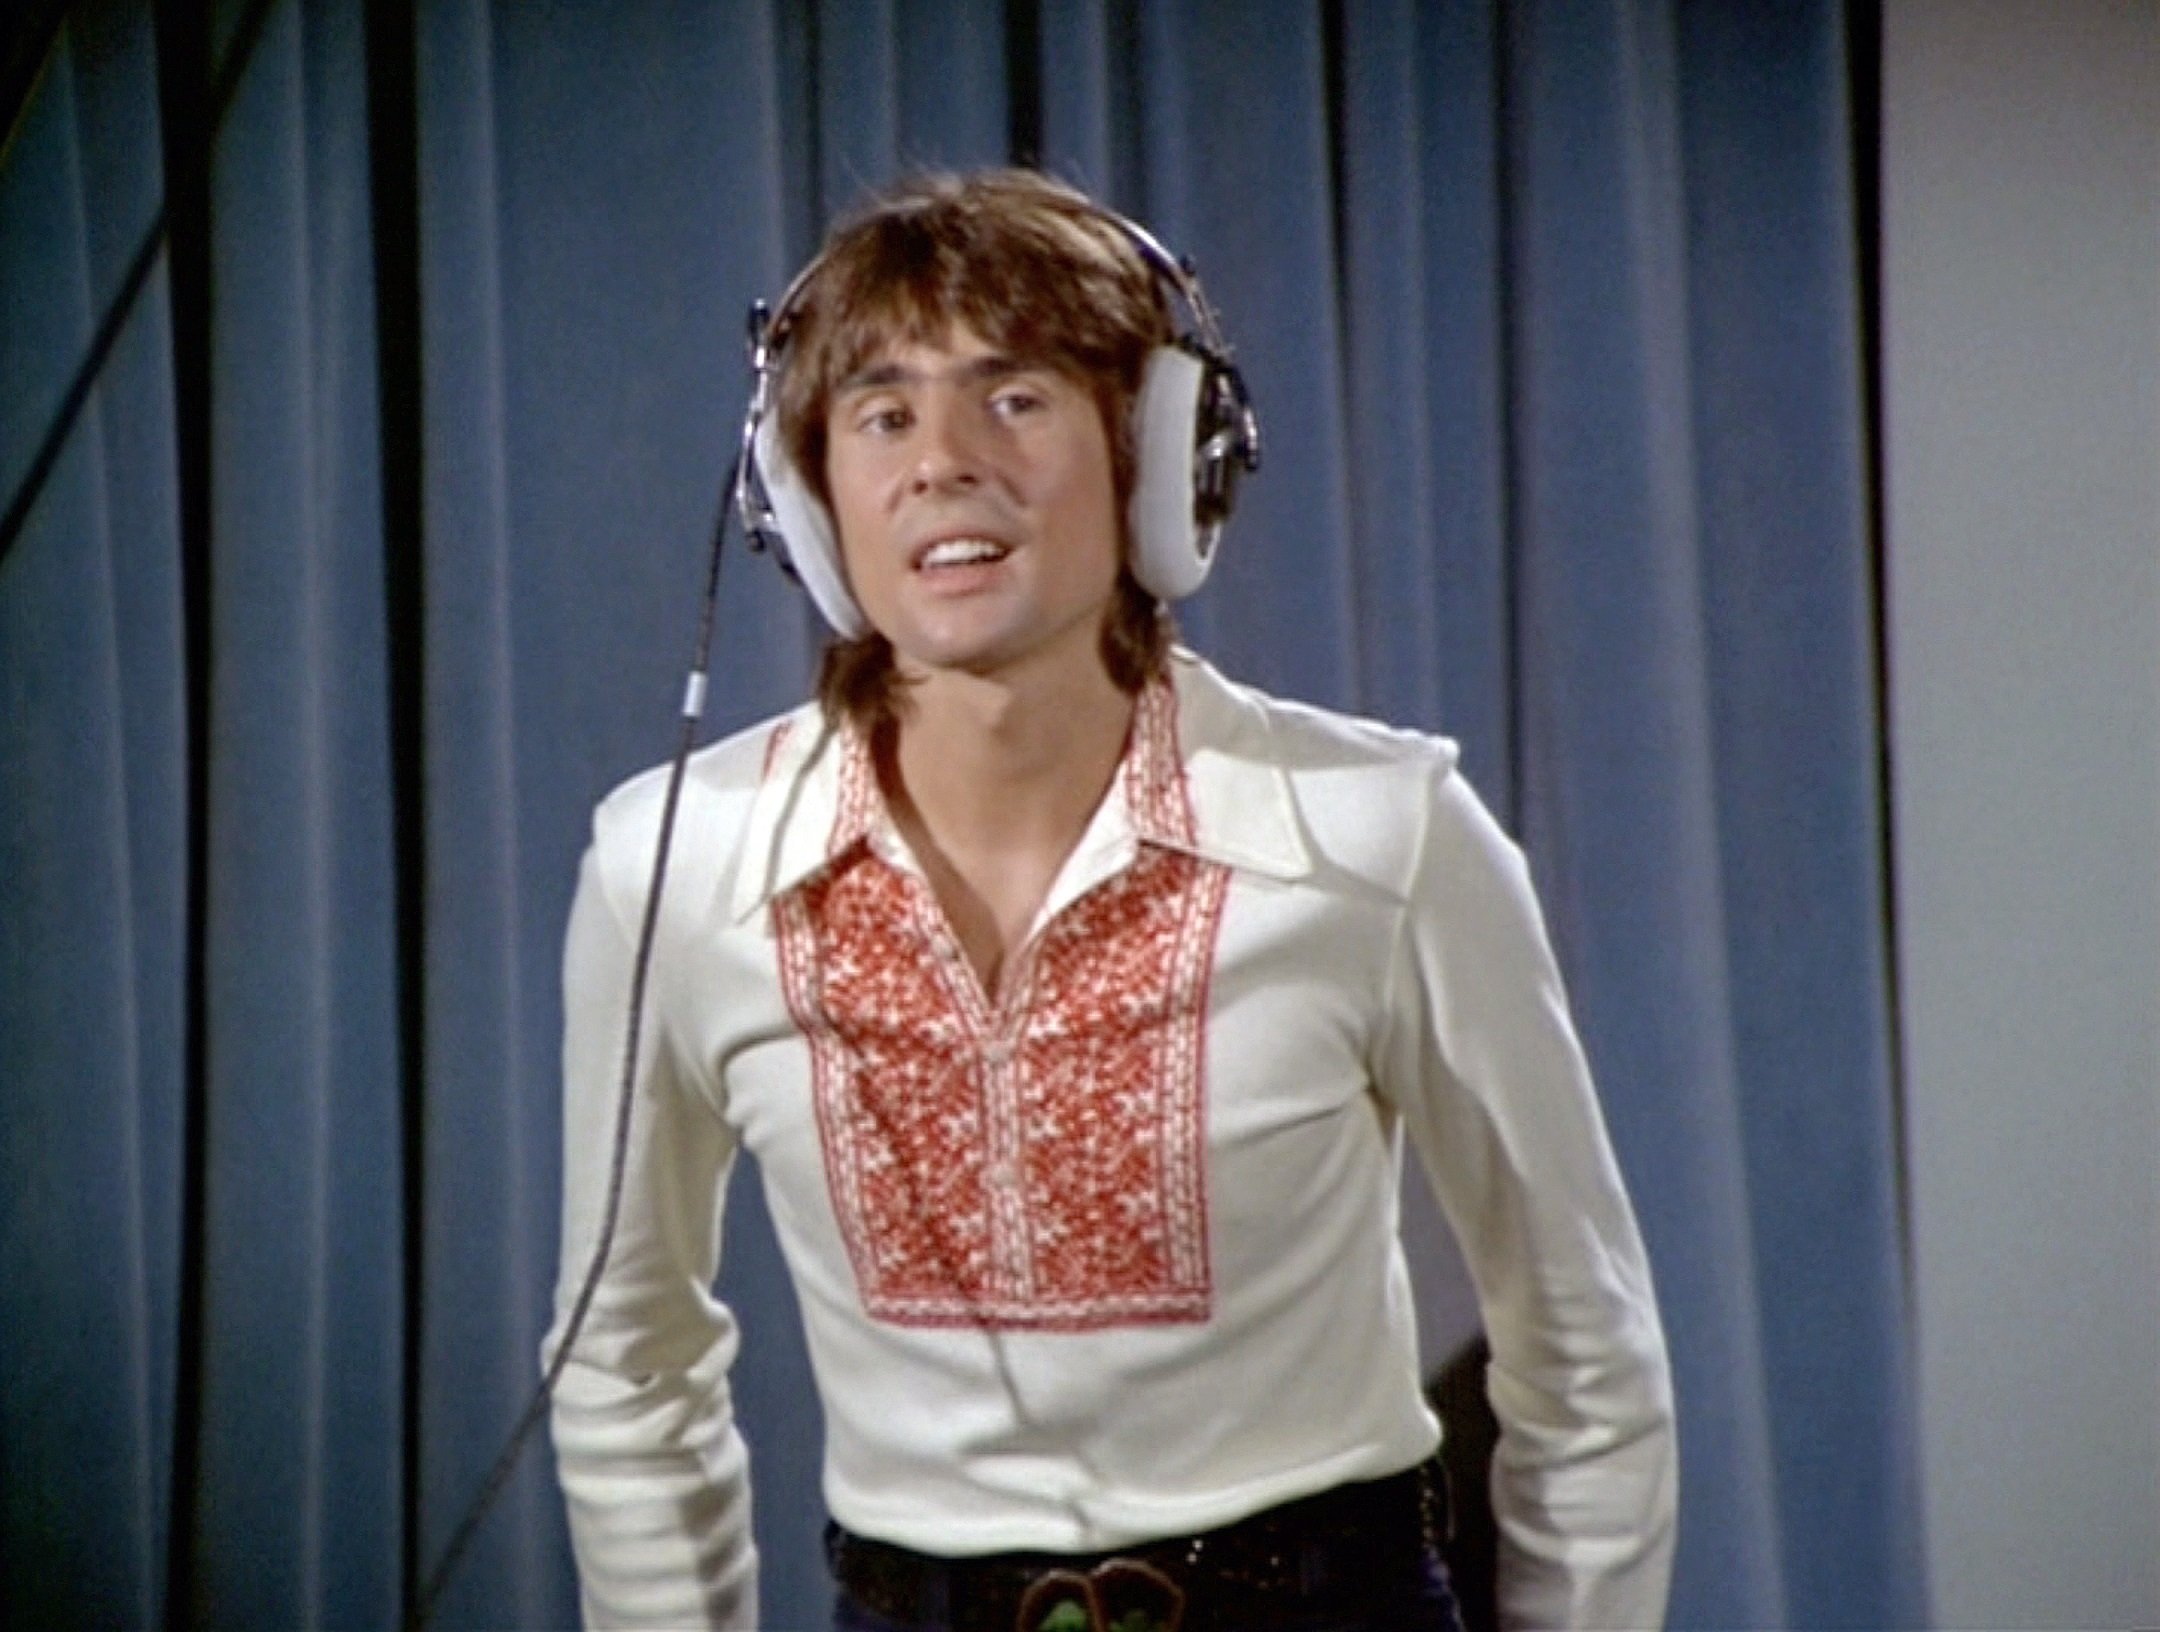 The Monkees' Davy Jones on 'The Brady Bunch' in front of a curtain